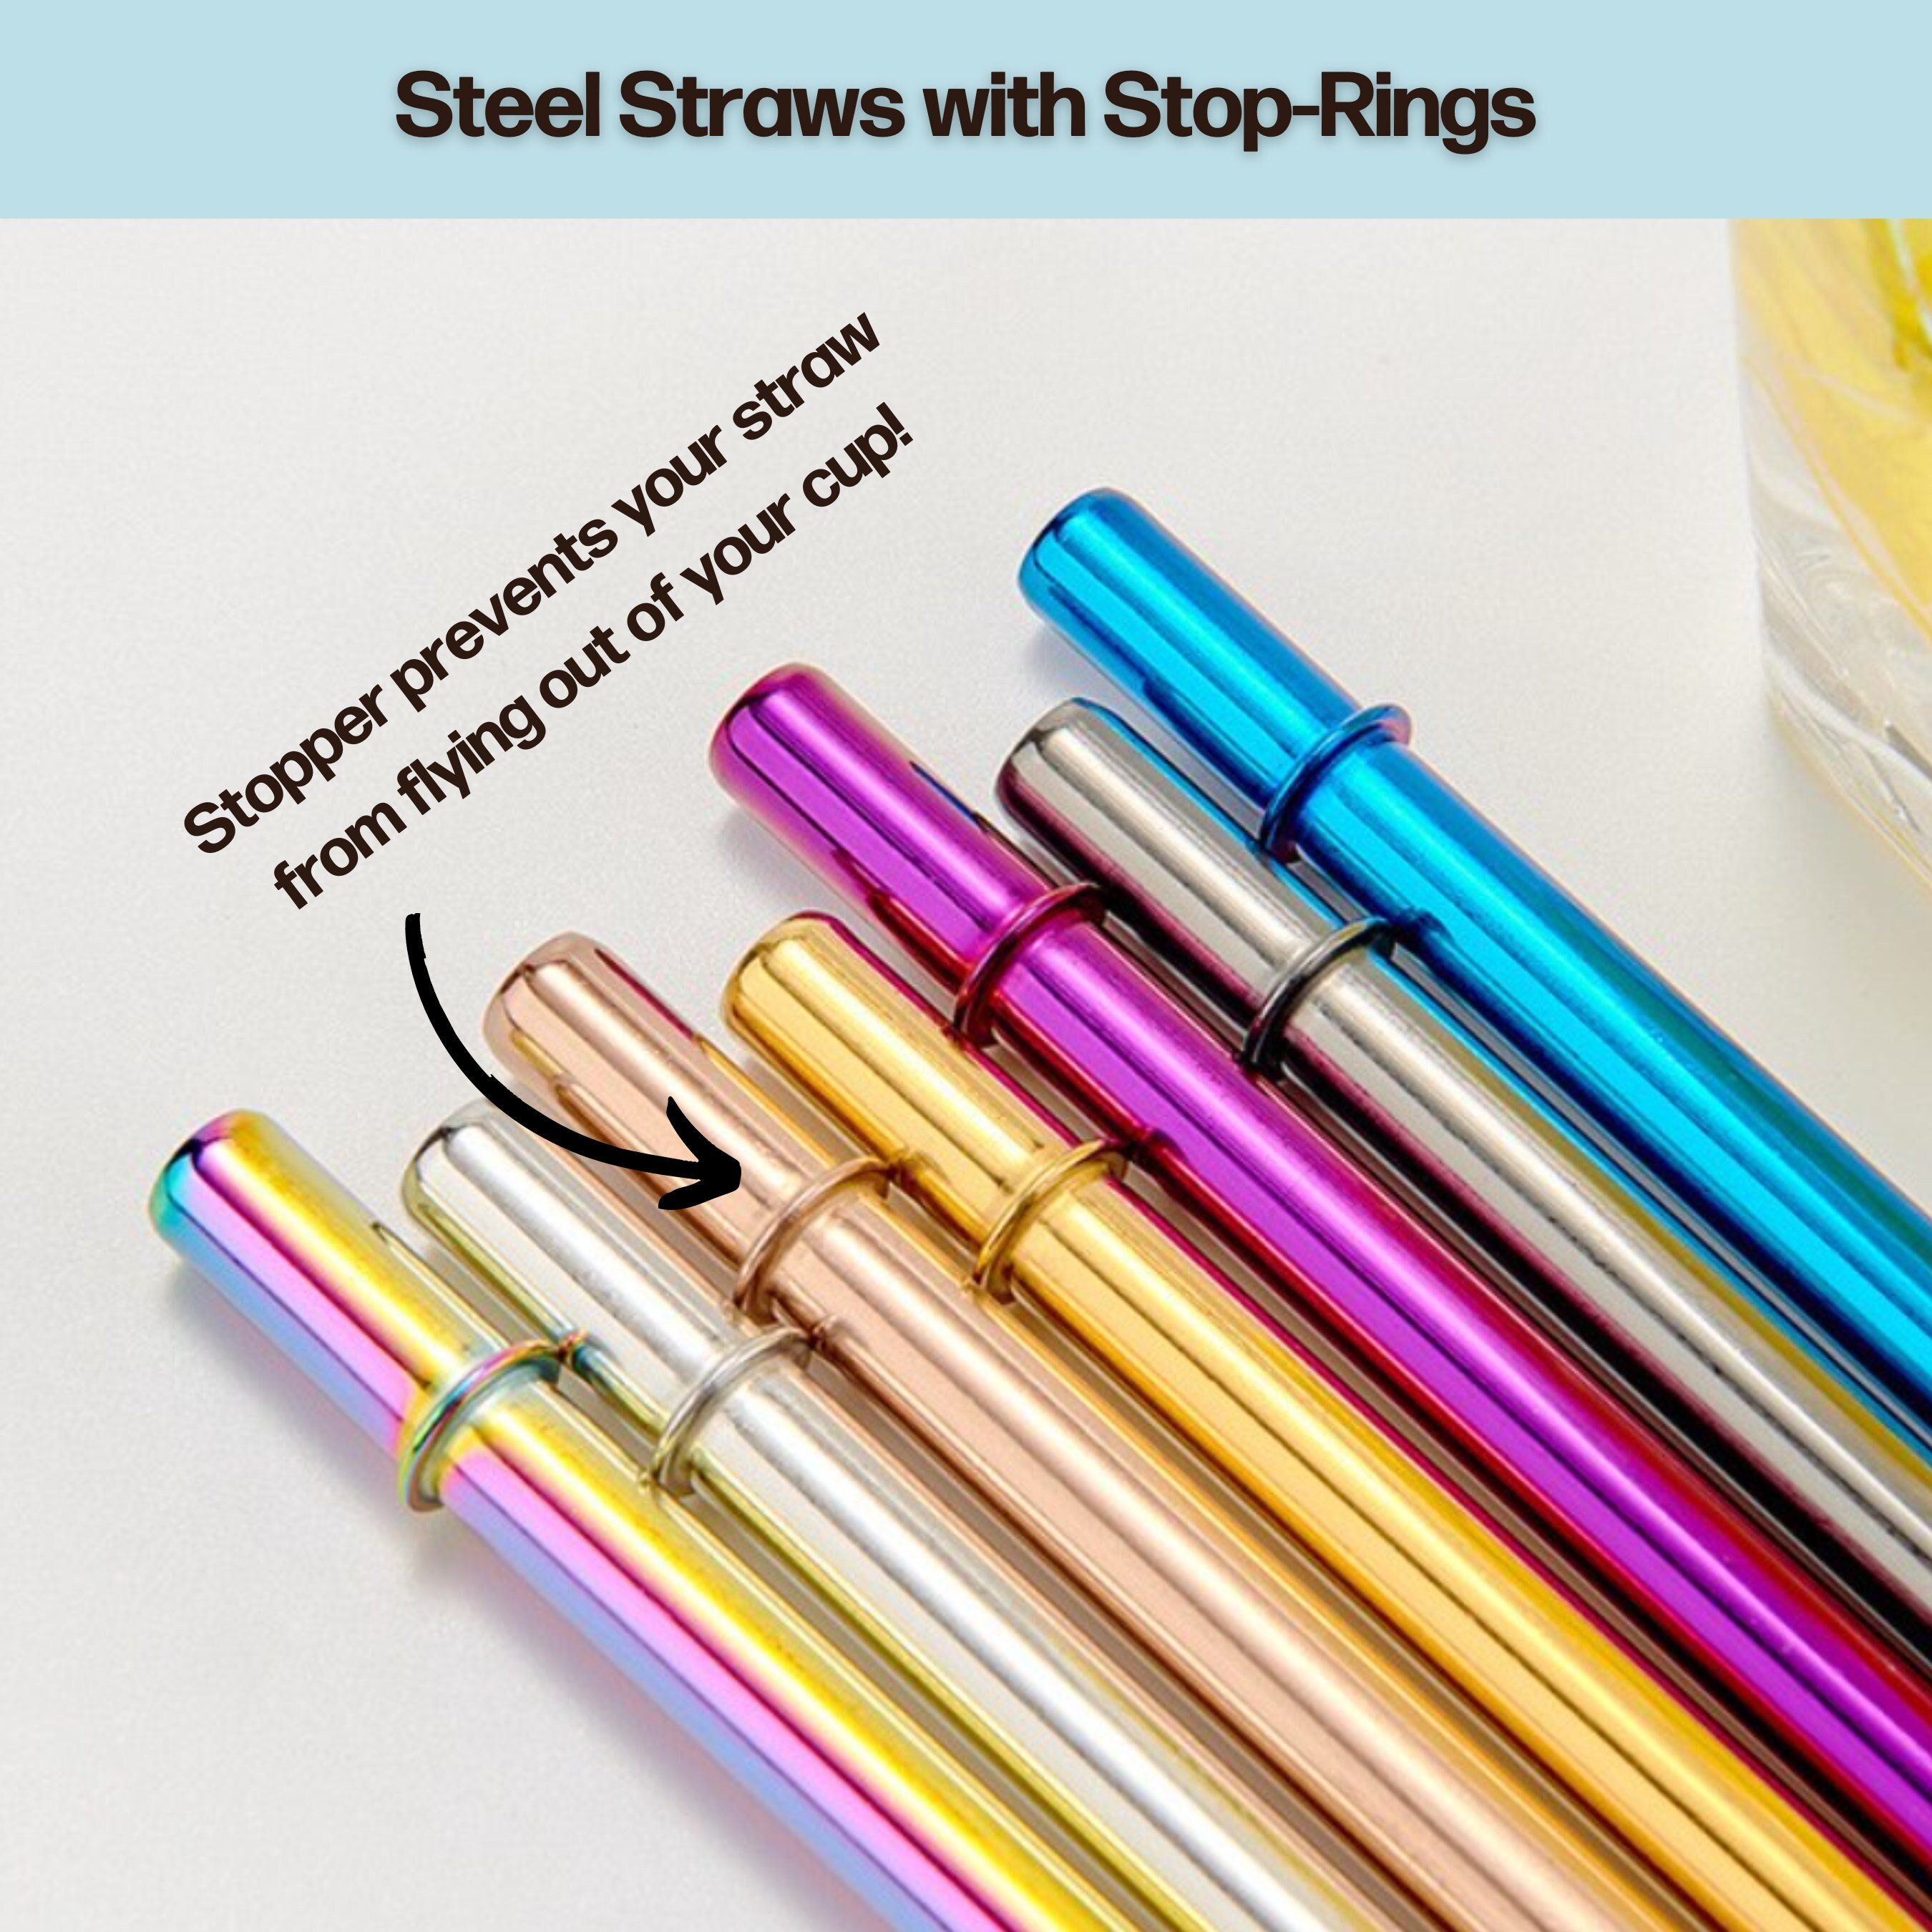 This $7 set of reusable metal straws is actually cute